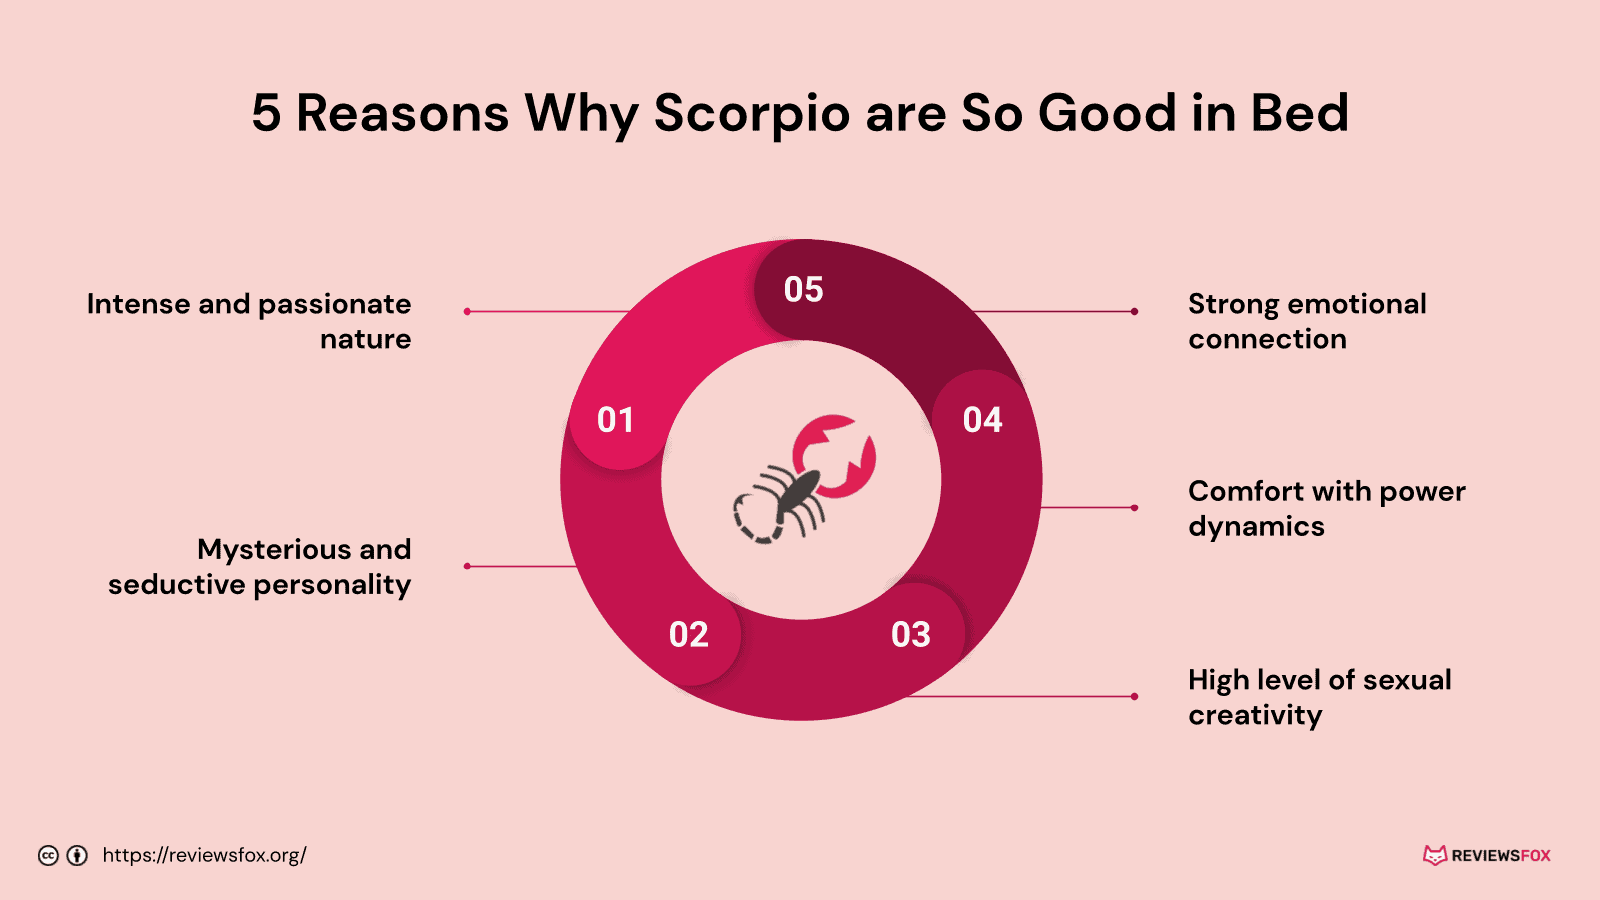 Why are Scorpio So Good in Bed?